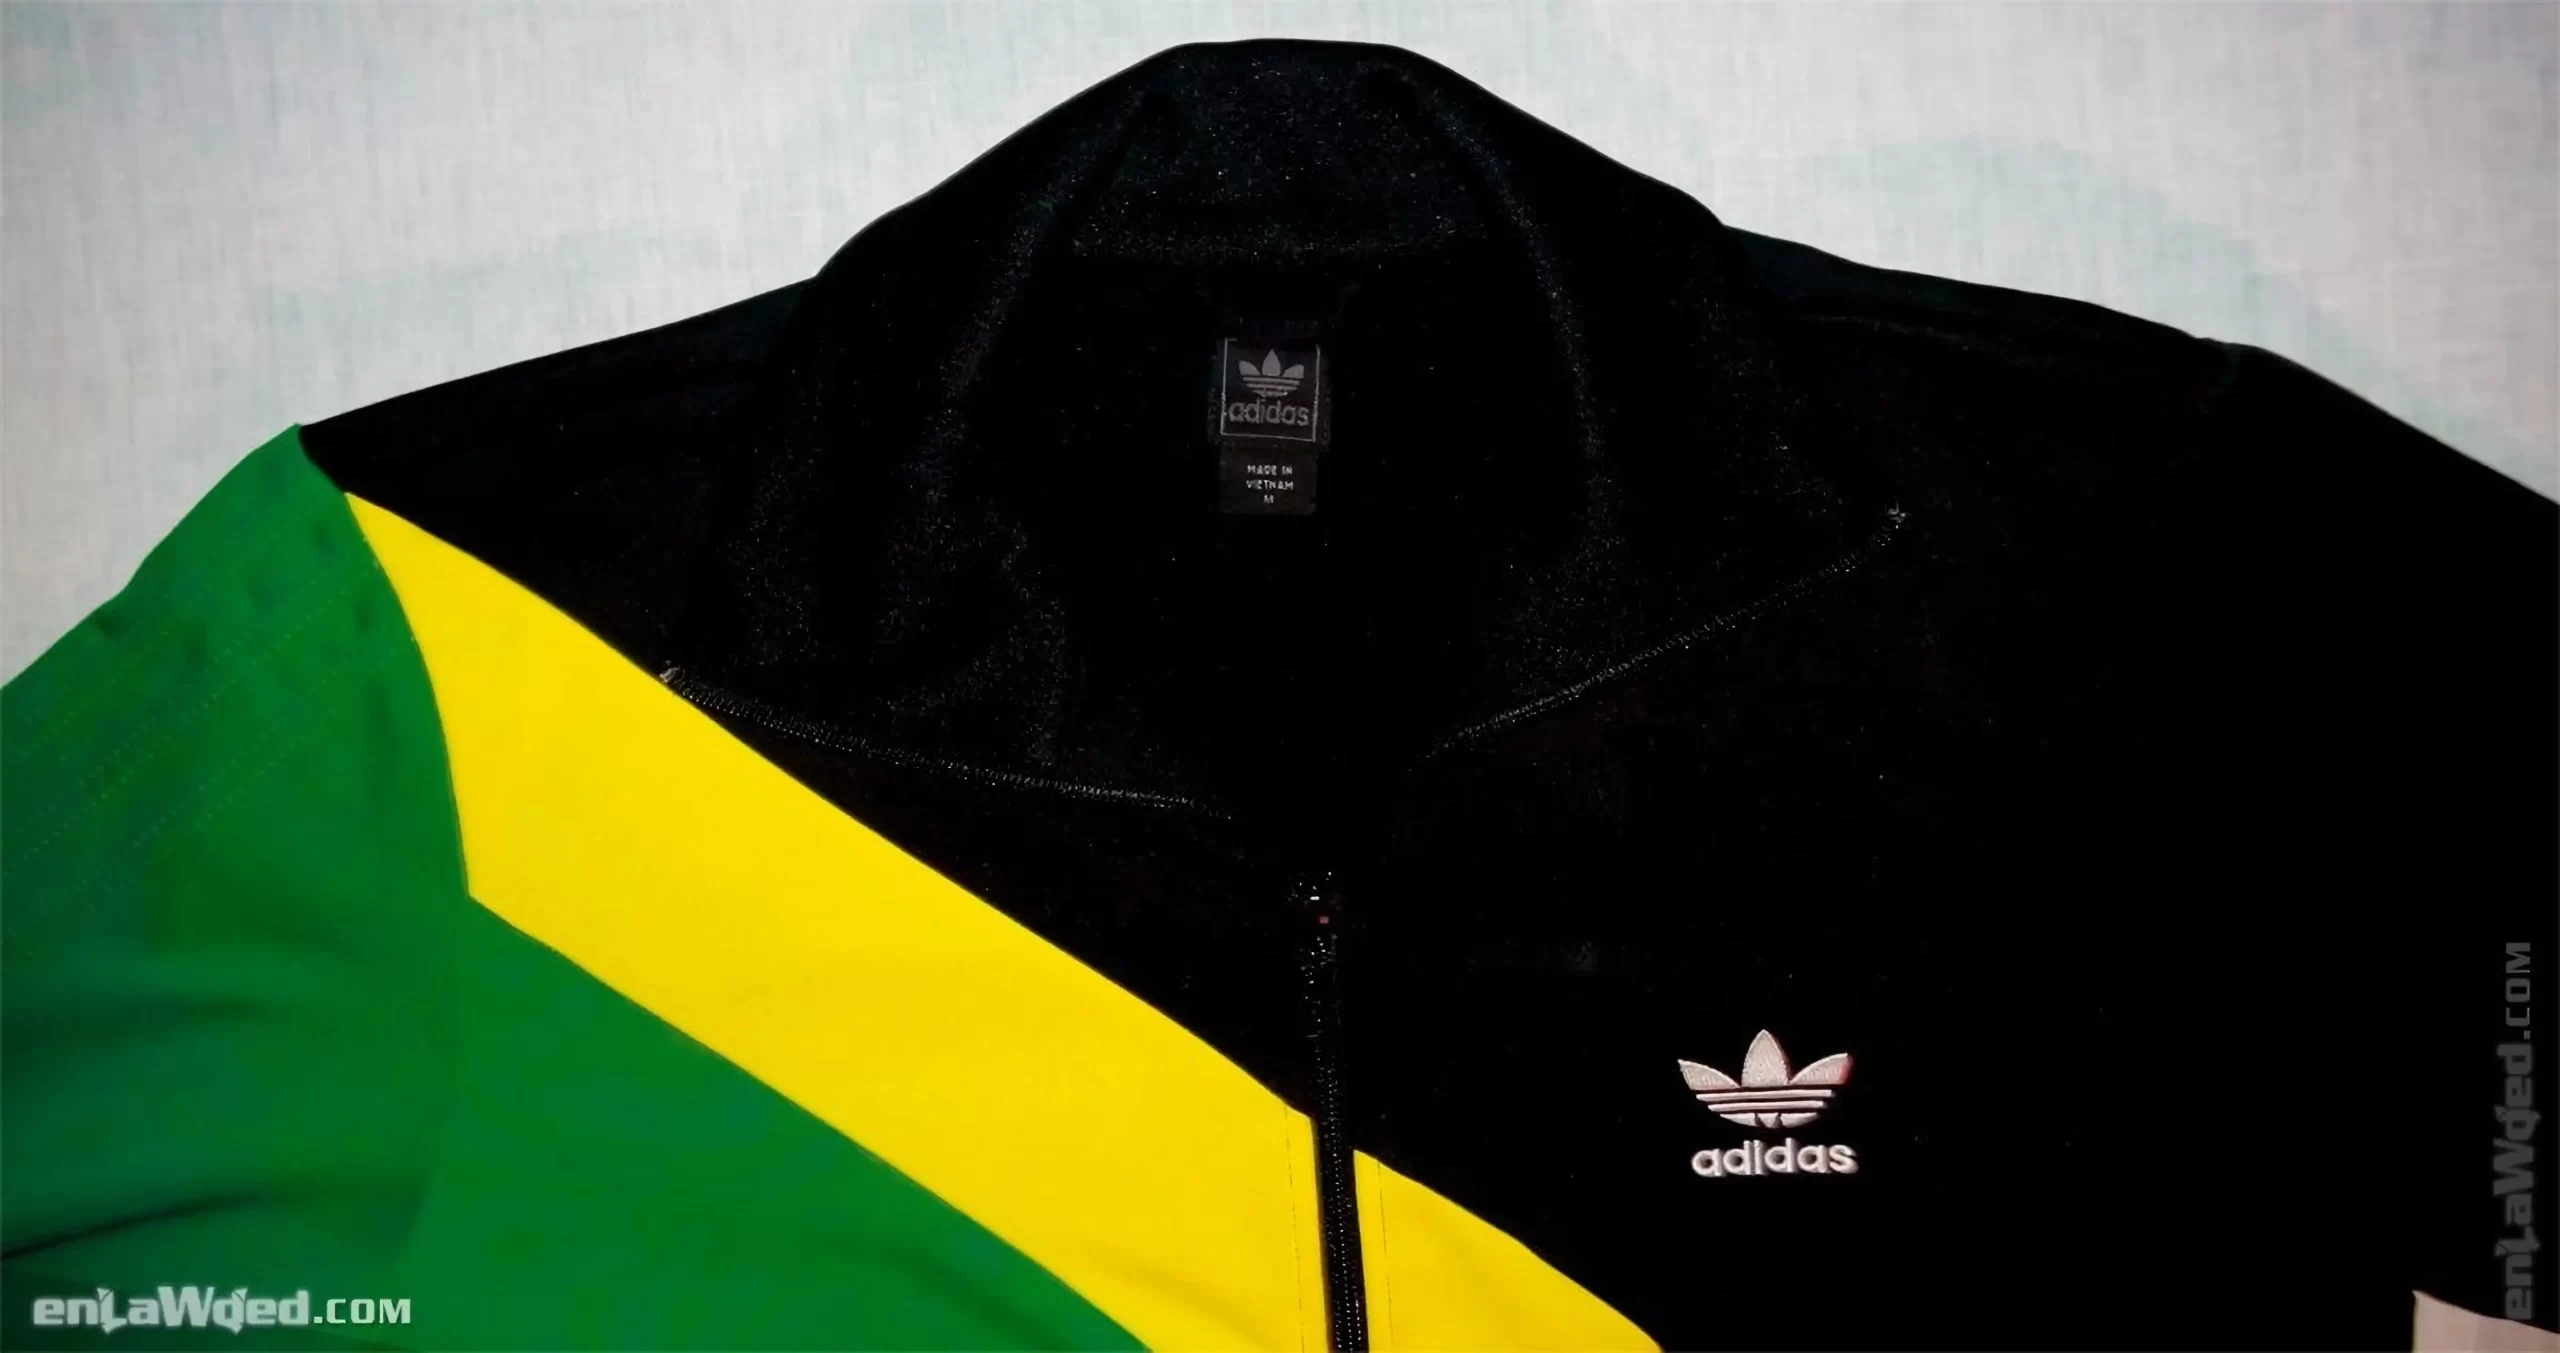 Men’s 2007 Cool Runnings Movie Track Top by Adidas: Recognized (EnLawded.com file #lmch9rdod4rpmi7oii)